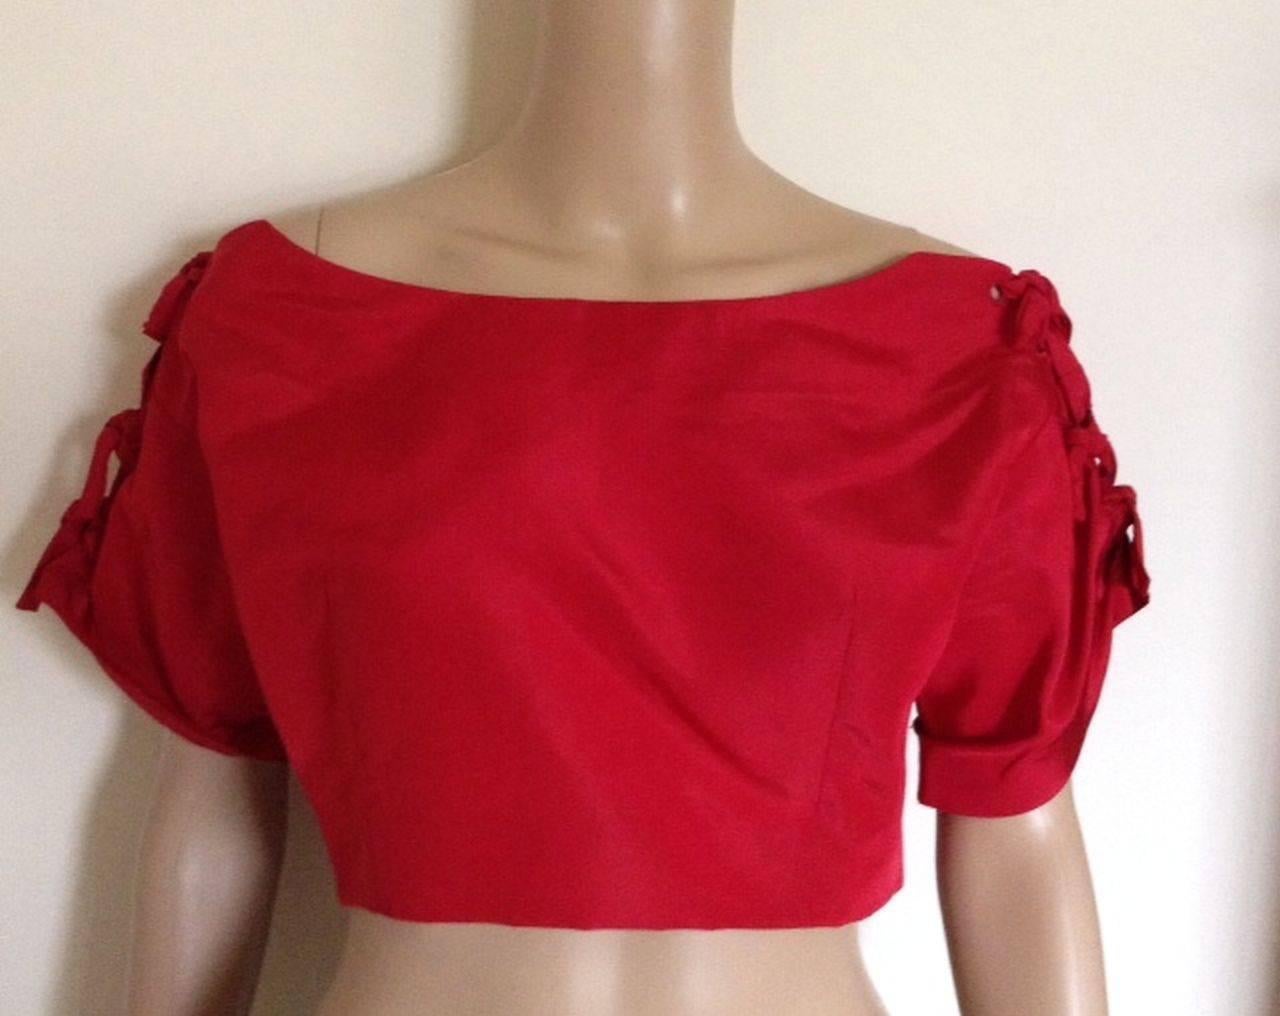 Rare 1953 Christian Dior red silk bolero jacket from the House of Dior's legendary 'Tulip' collection.

A perfect way to introduce vintage into your wardrobe, this wonderful jacket exemplifies the couture design values of Dior while being sharp